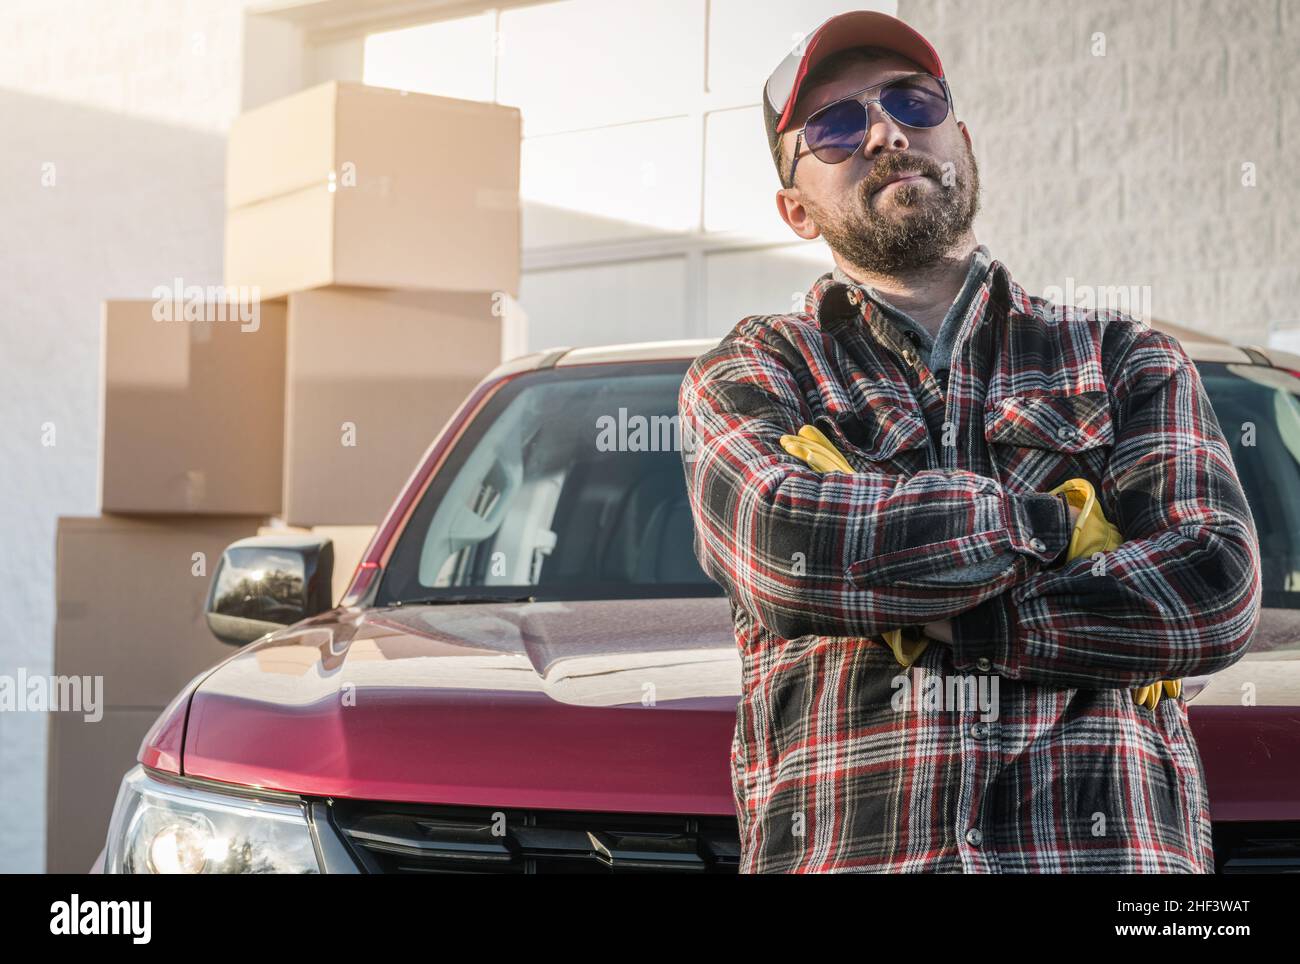 Proud Caucasian Contractor Worker in His 30s Wearing Sunglasses Next to His Modern Pickup Truck and Cargo Boxes. Supplies Delivery Theme. Stock Photo